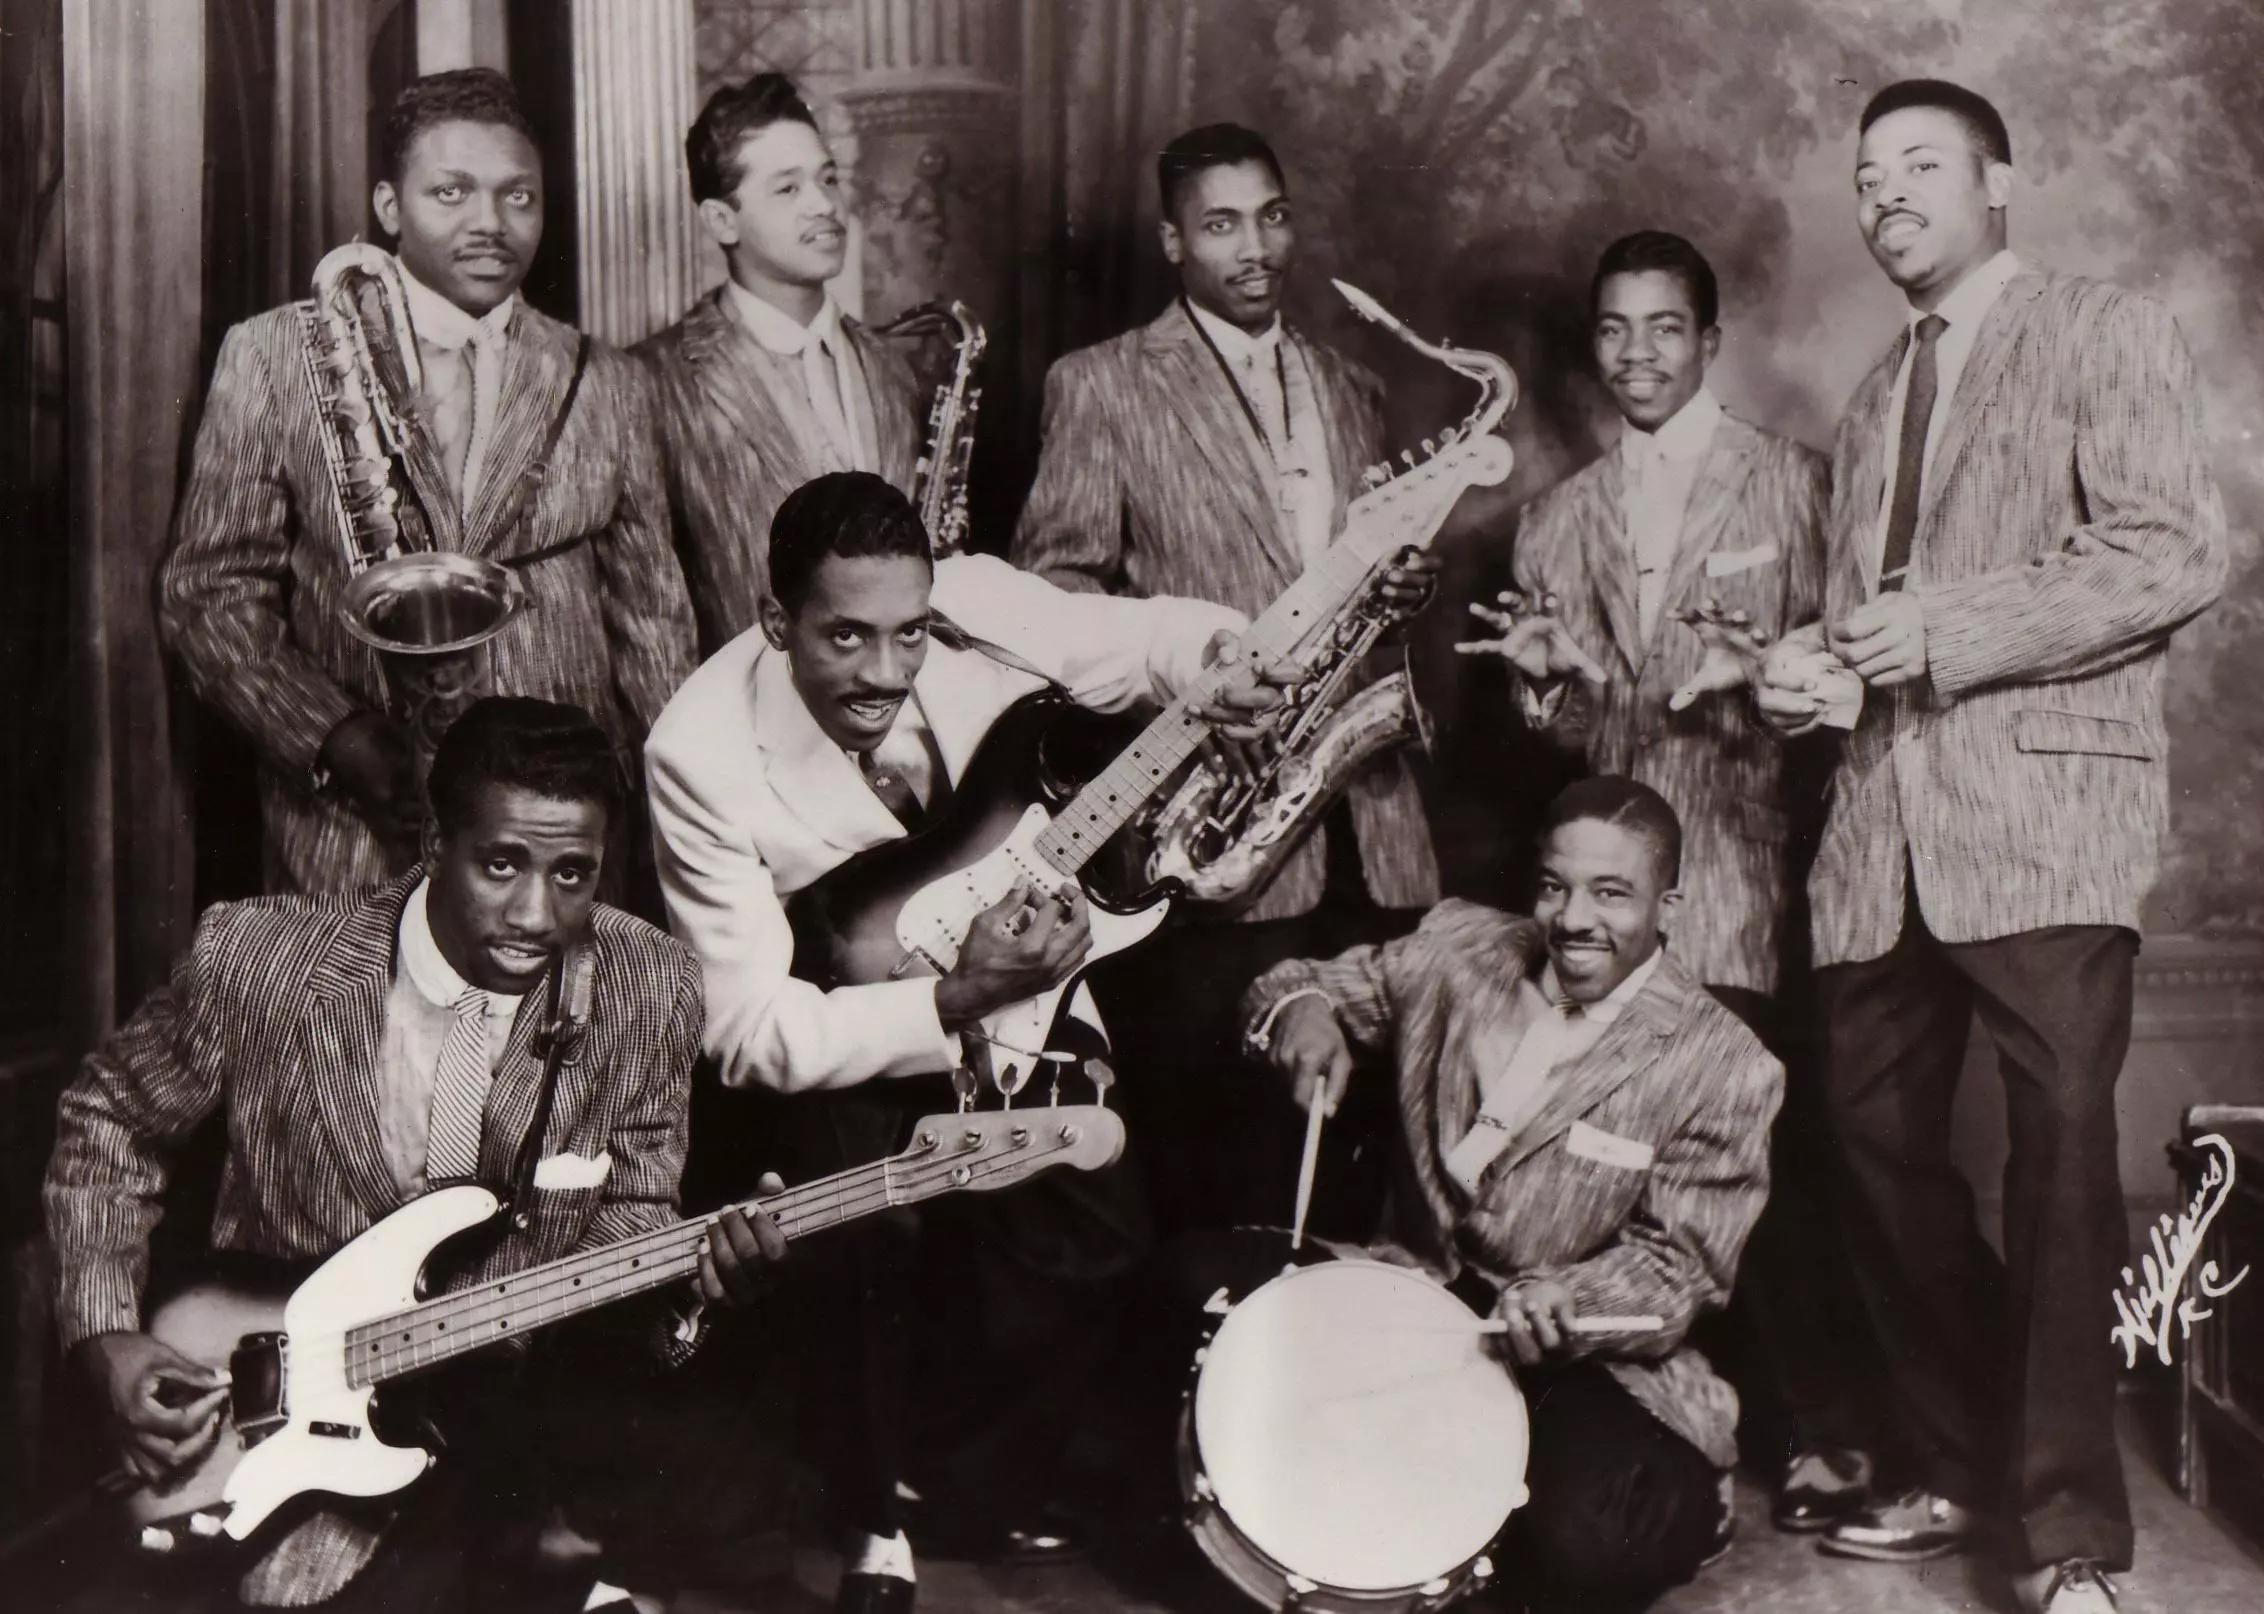 Ike Turner and the Kings of Rhythm in 1956.